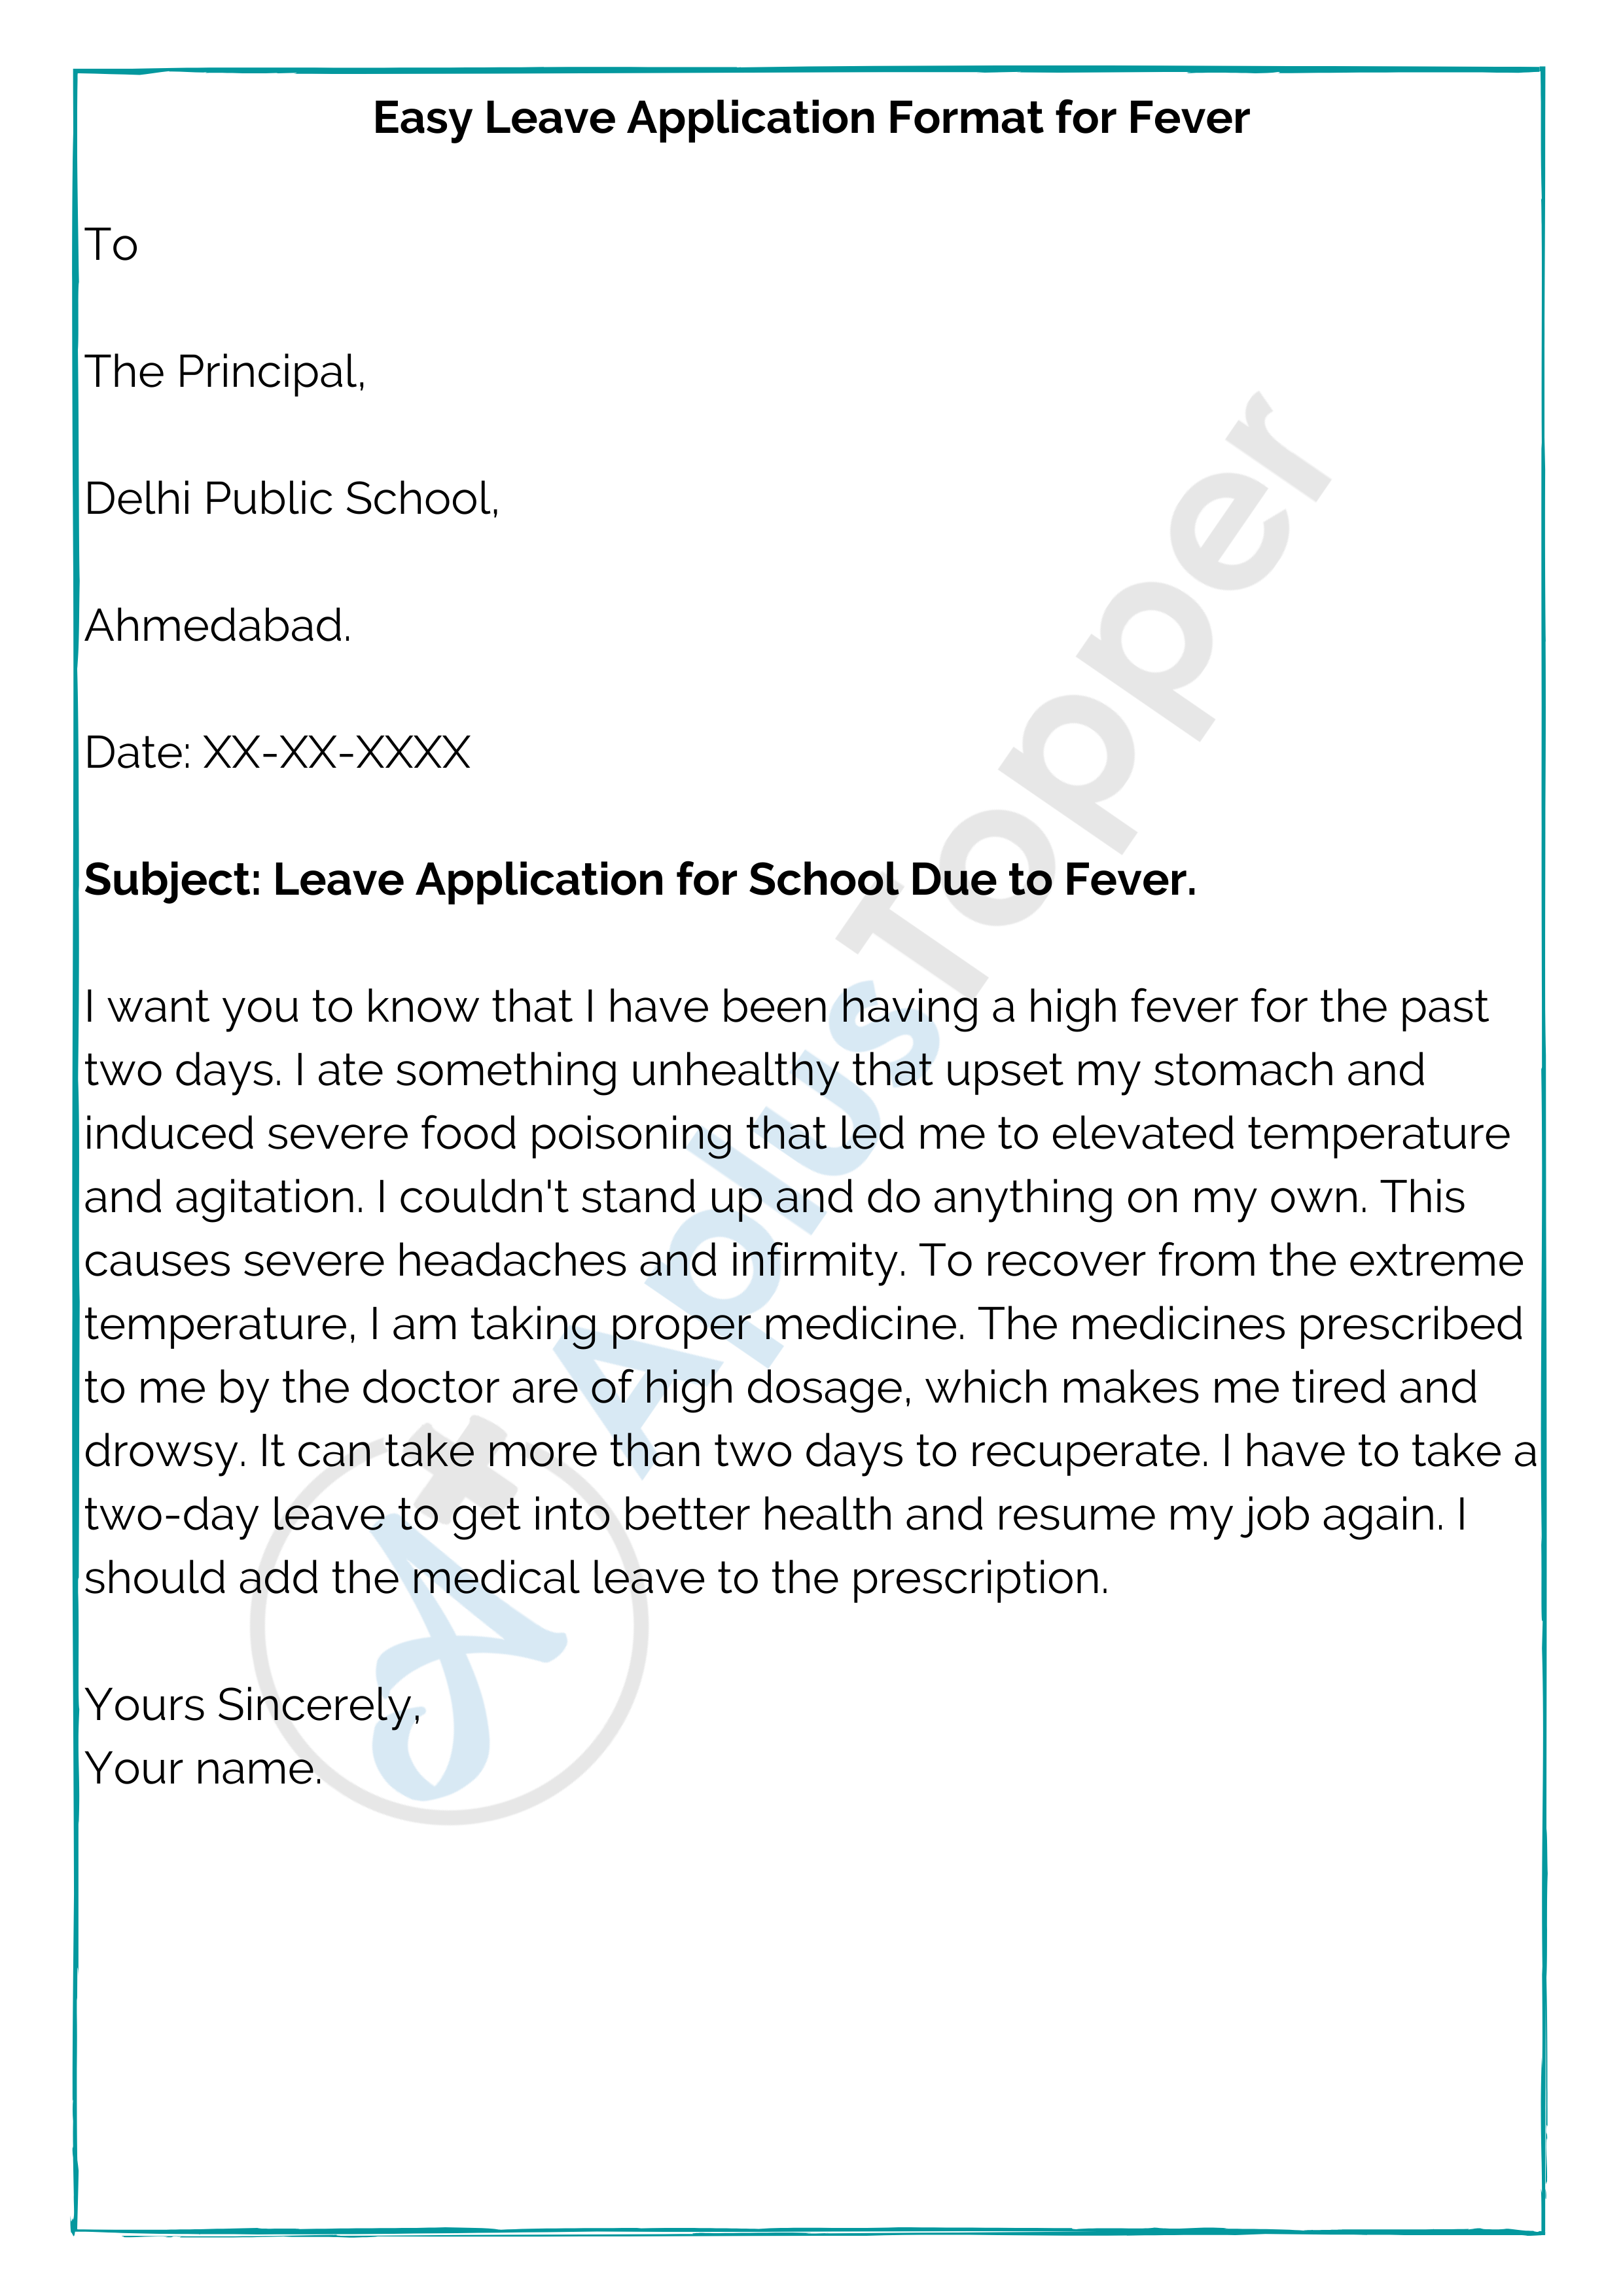 leave application letter for school due to fever by parents